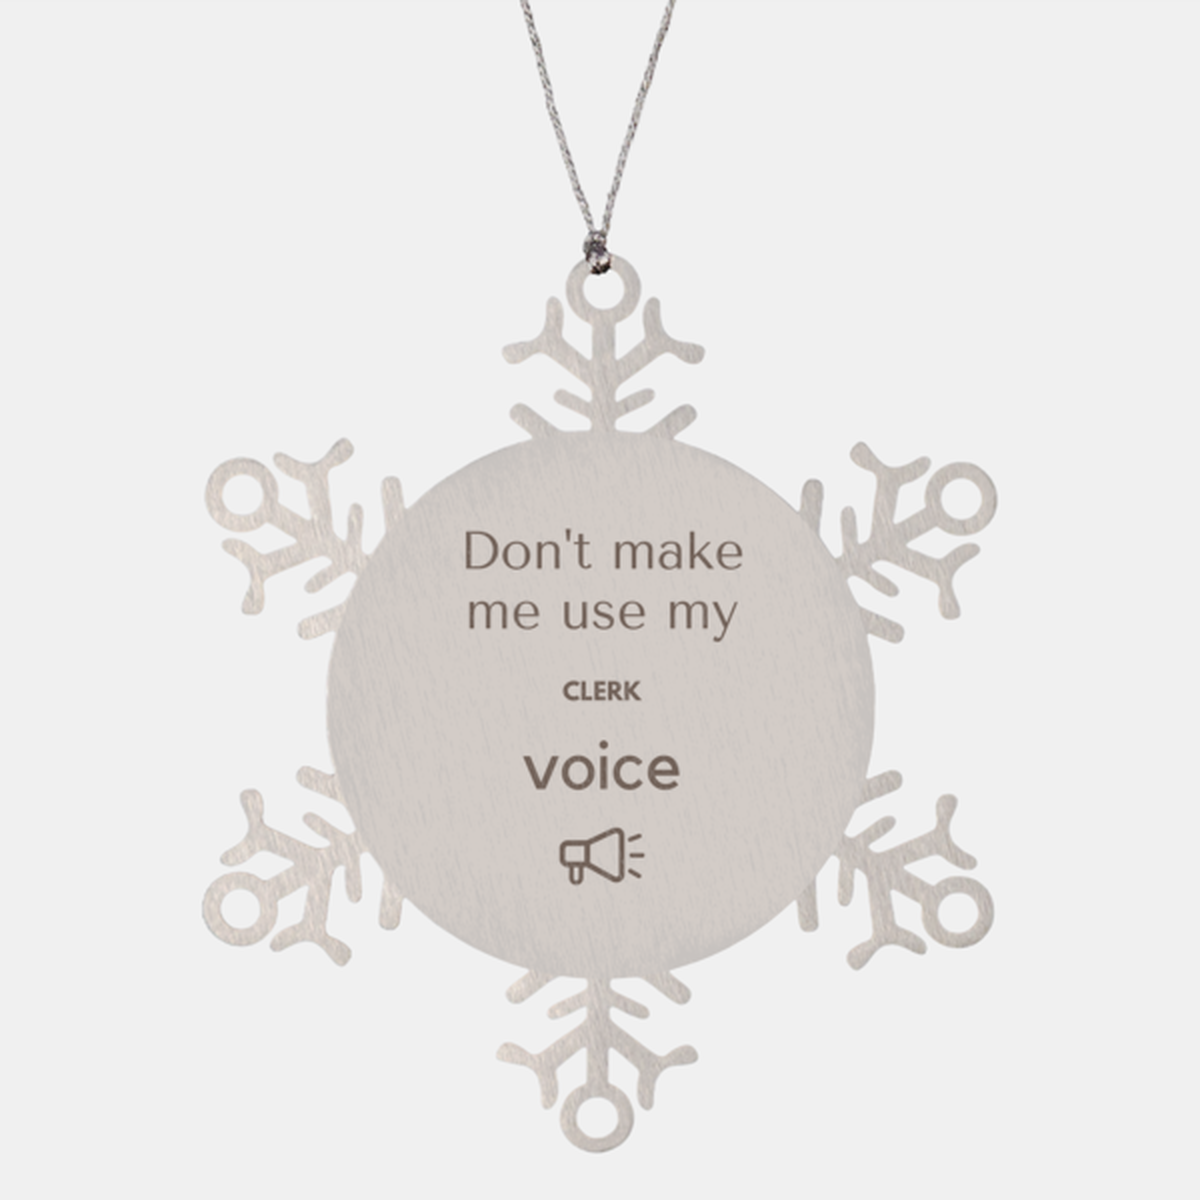 Don't make me use my Clerk voice, Sarcasm Clerk Ornament Gifts, Christmas Clerk Snowflake Ornament Unique Gifts For Clerk Coworkers, Men, Women, Colleague, Friends